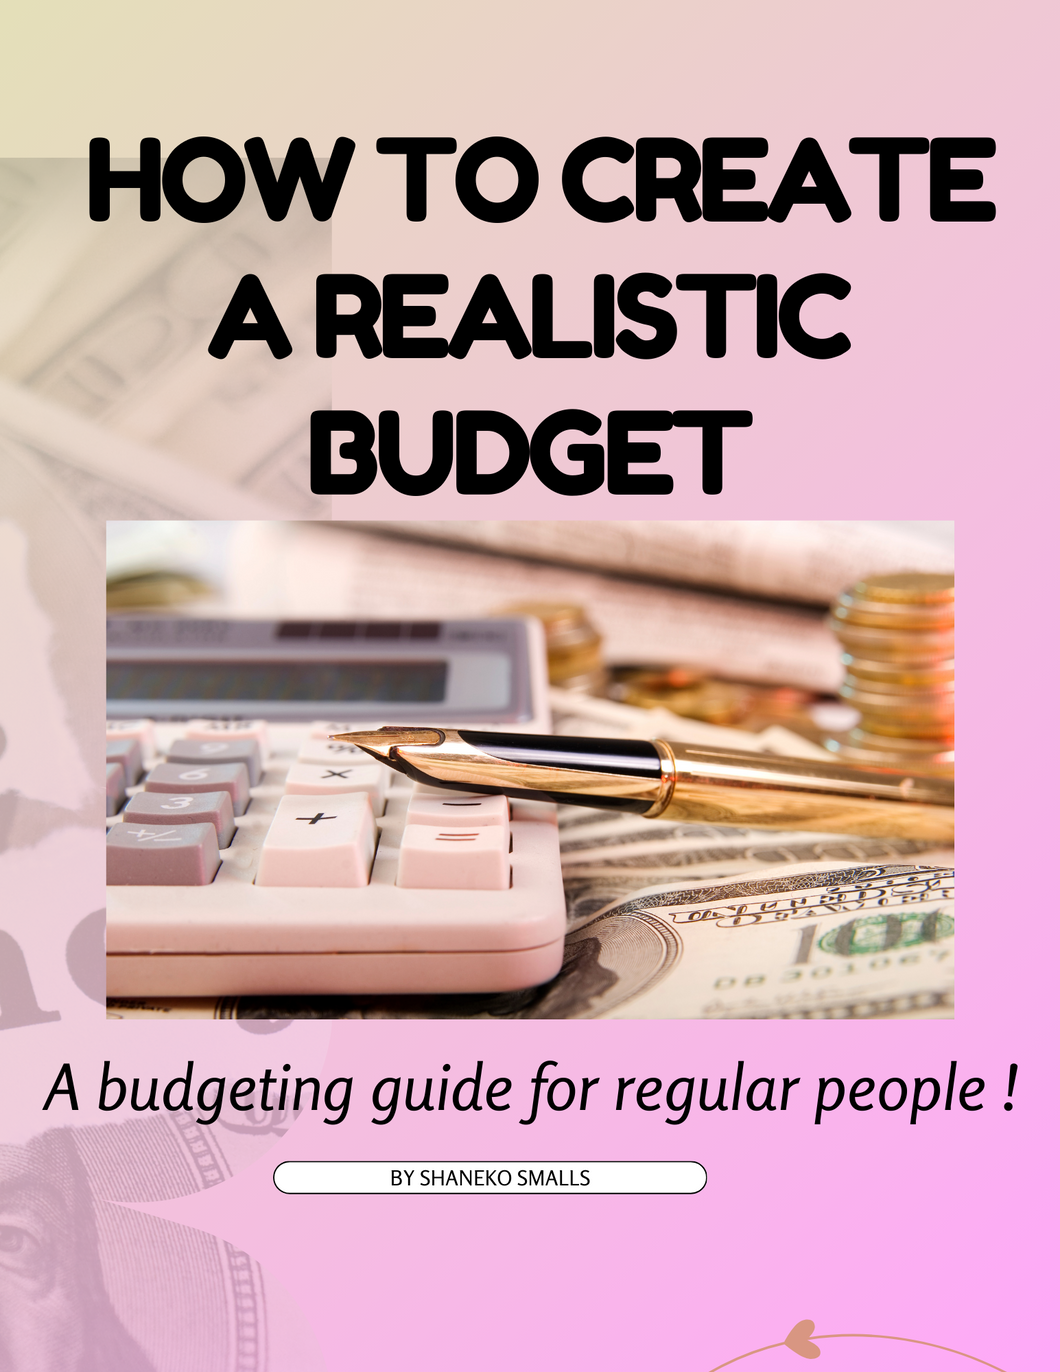 HOW TO CREATE A REALISTIC BUDGET